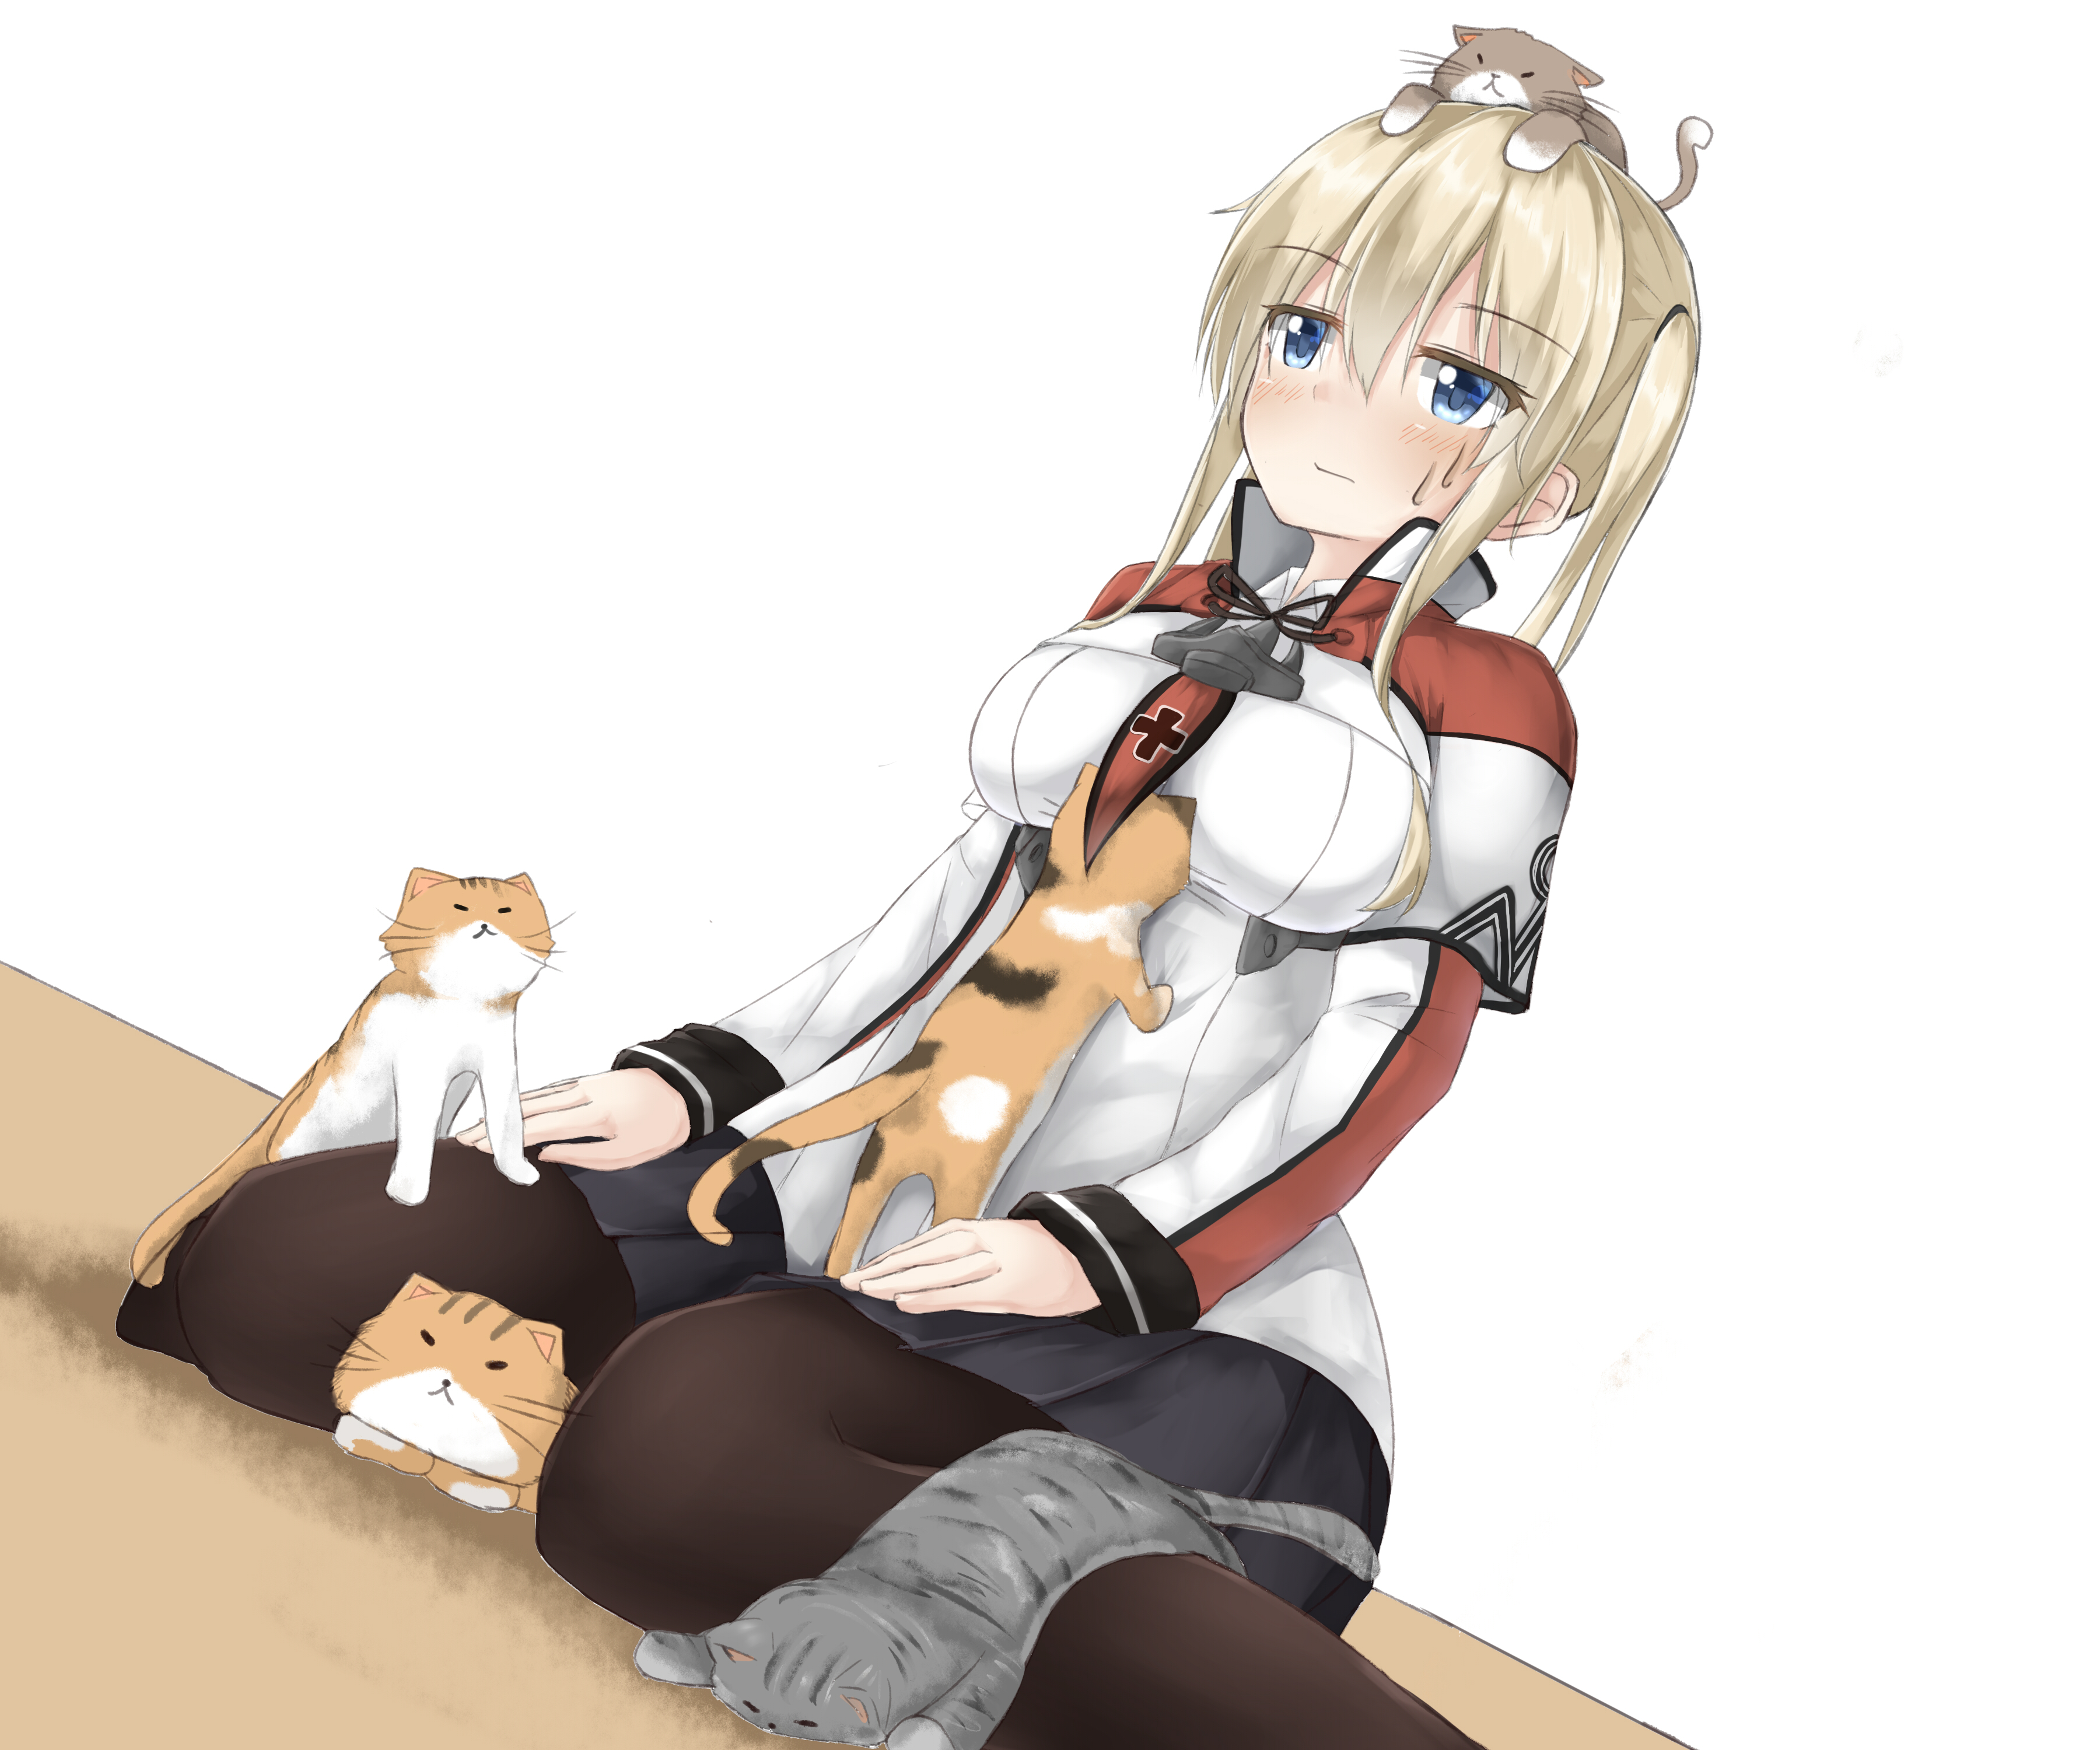 Anime 3600x3000 anime anime girls Kantai Collection Graf Zeppelin (KanColle) twintails blonde solo artwork digital art fan art cats animals